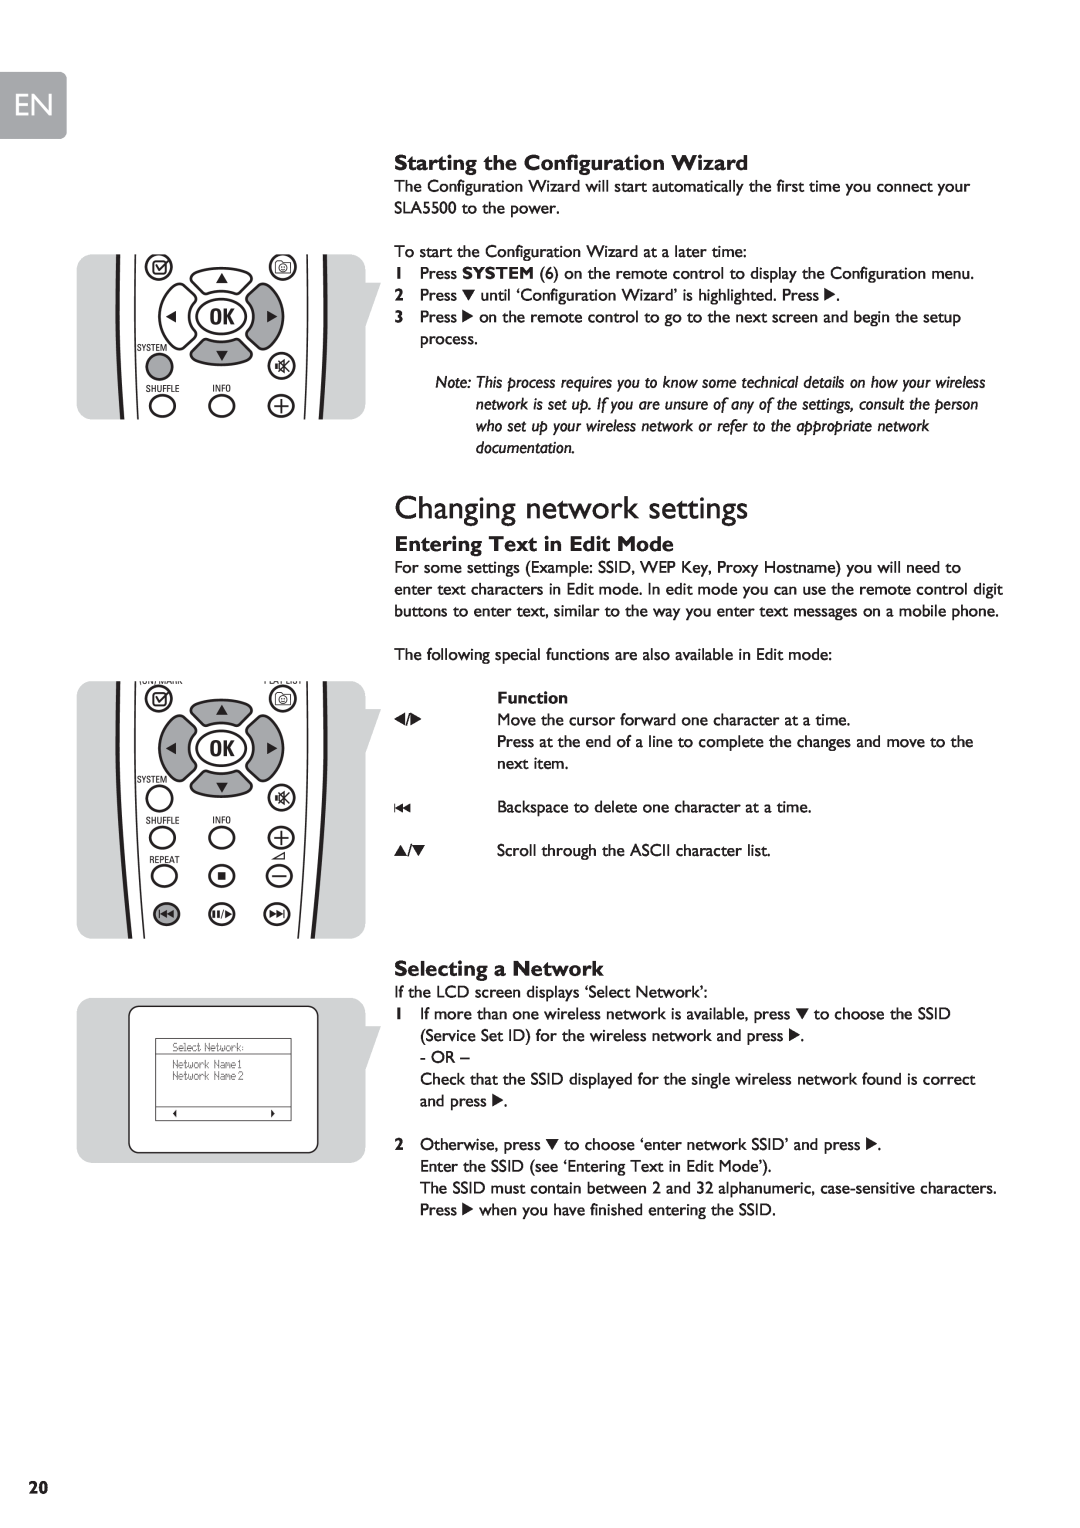 Philips SLA5500 Changing network settings, Starting the Configuration Wizard, Entering Text in Edit Mode, Function 